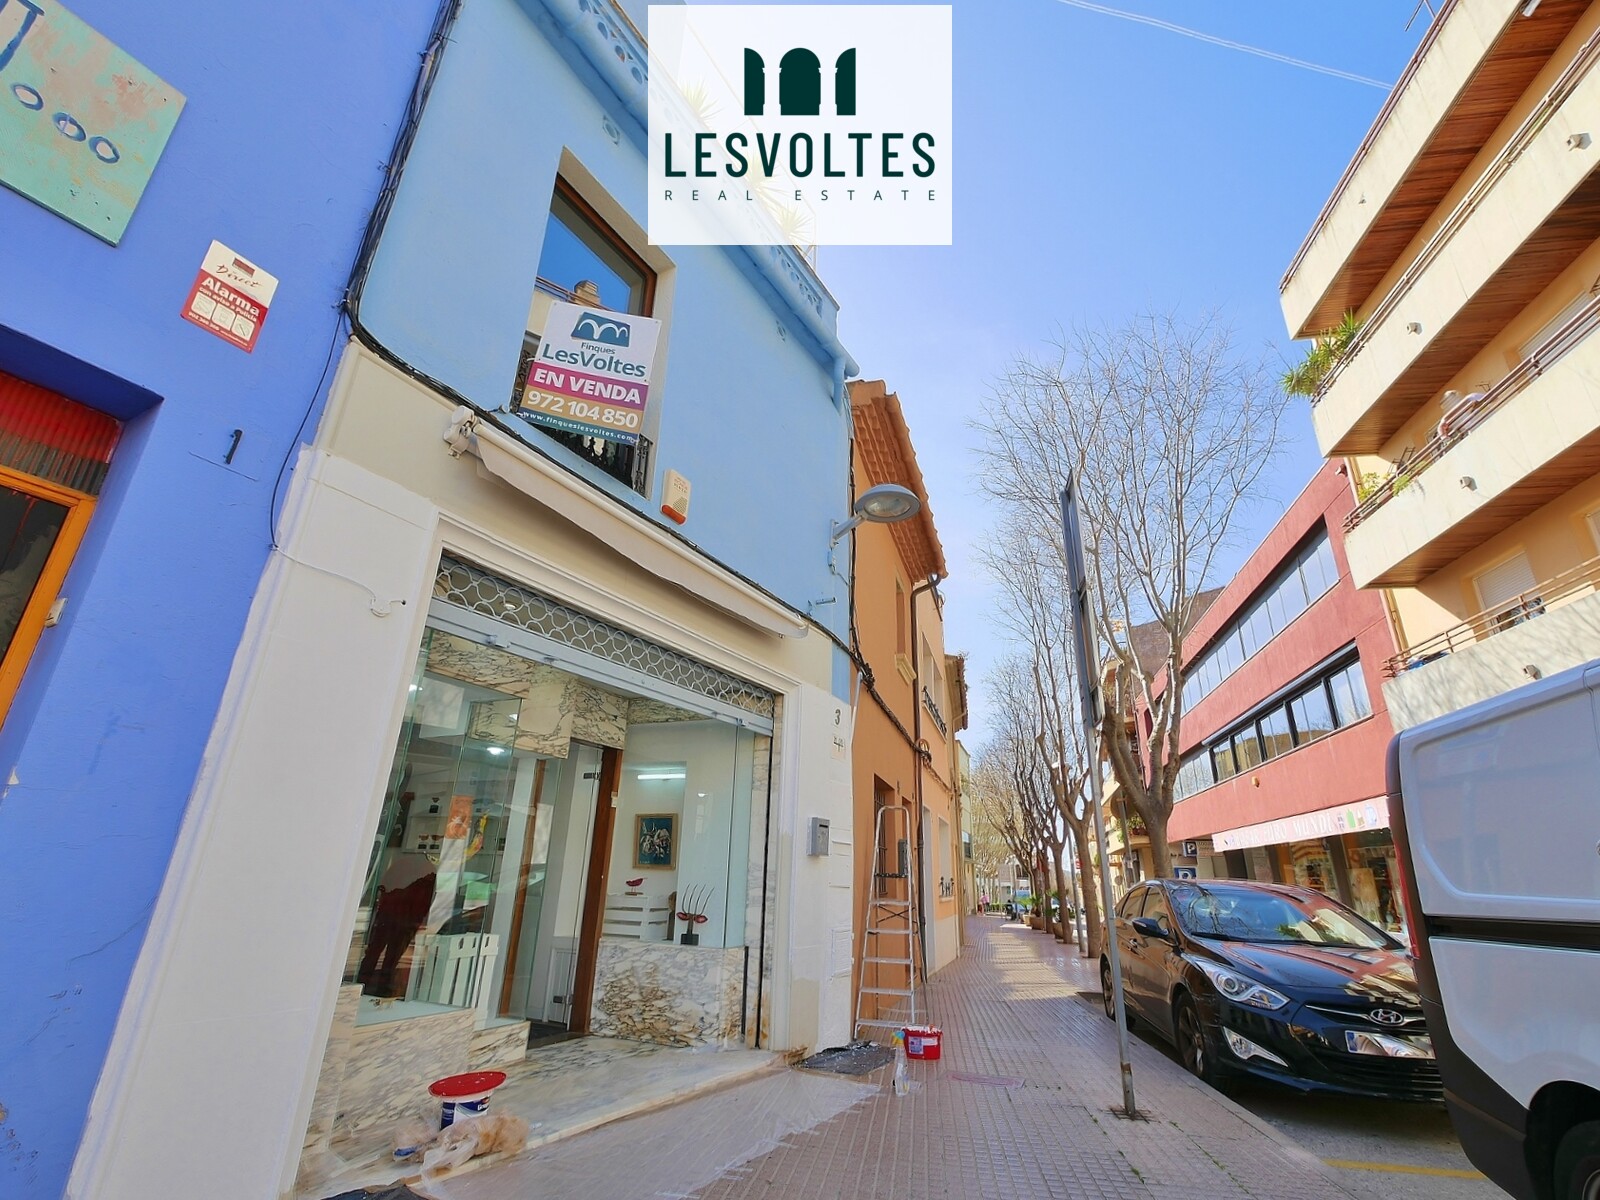 CHANCE! RENOVATED HOUSE WITH CHARM AND GOOD CONDITION IN THE HEART OF PALAFRUGELL. TERRACE ON THE TOP FLOOR.